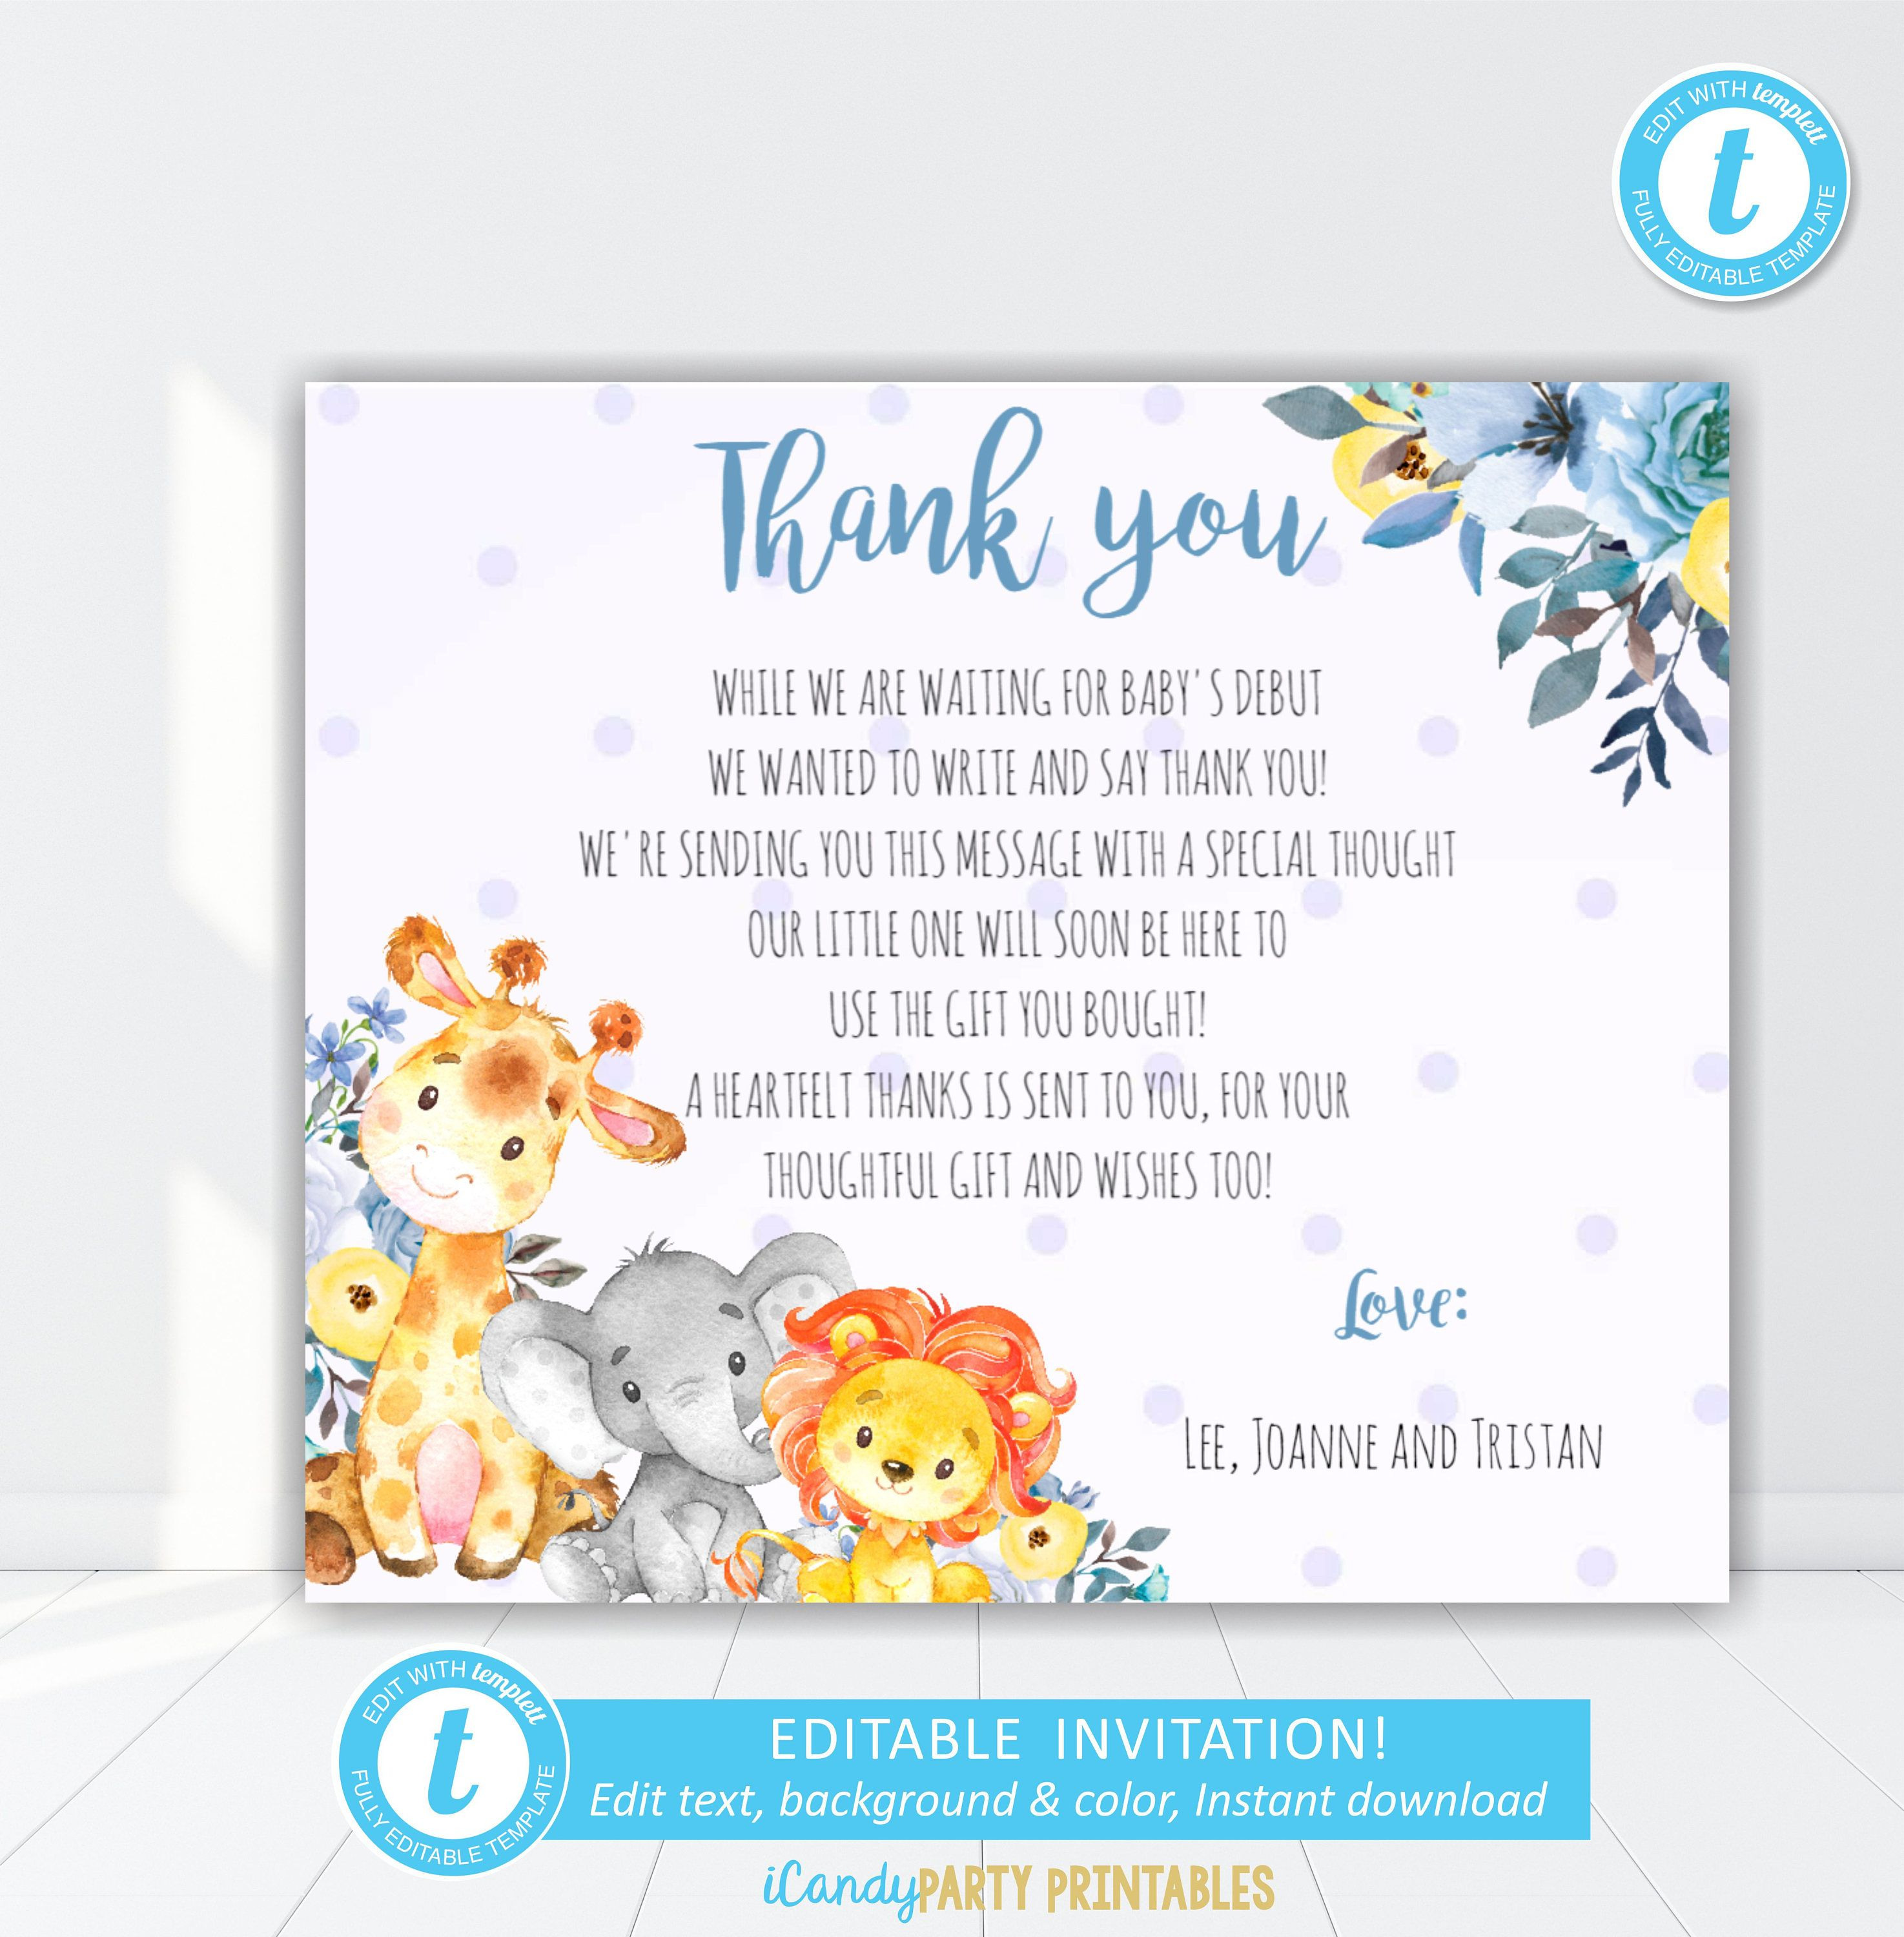 Full Size of Baby Shower:72+ Rousing Baby Shower Thank You Cards Picture Ideas Baby Shower Thank You Cards Baby Shower Hairstyles Baby Shower De Baby Shower Hashtag Ideas Baby Shower Giveaways Baby Shower Napkins Nautical Baby Shower Thank You Cards Beautiful Safari Animal Boy